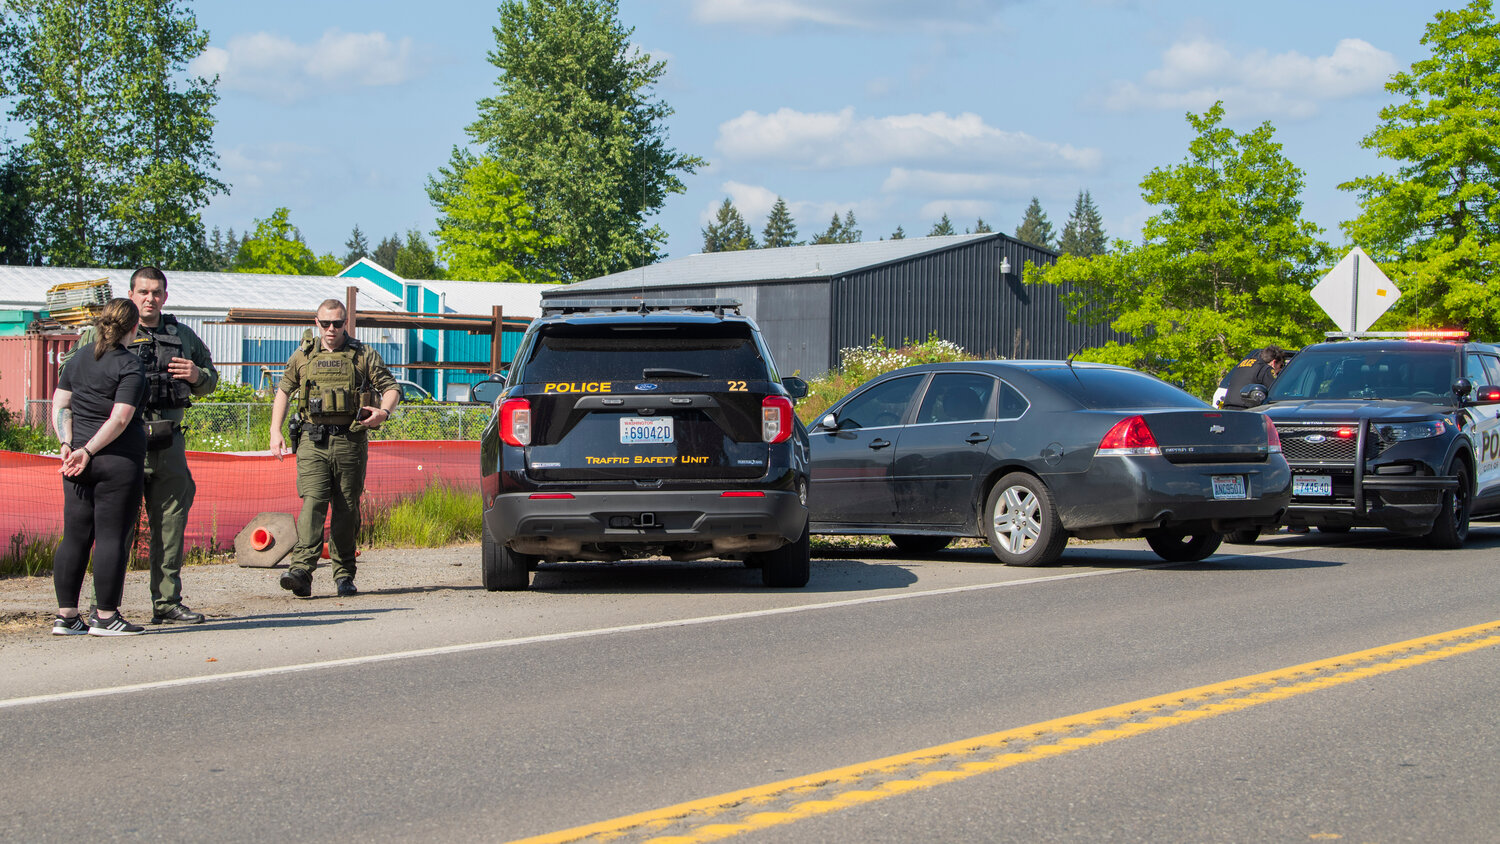 Two individuals were placed into custody after a Flock Safety camera identified the vehicle they were traveling in as stolen in downtown Centralia on Wednesday, May 24. The arrests were made in Grand Mound after the vehicle was followed by undercover officers.